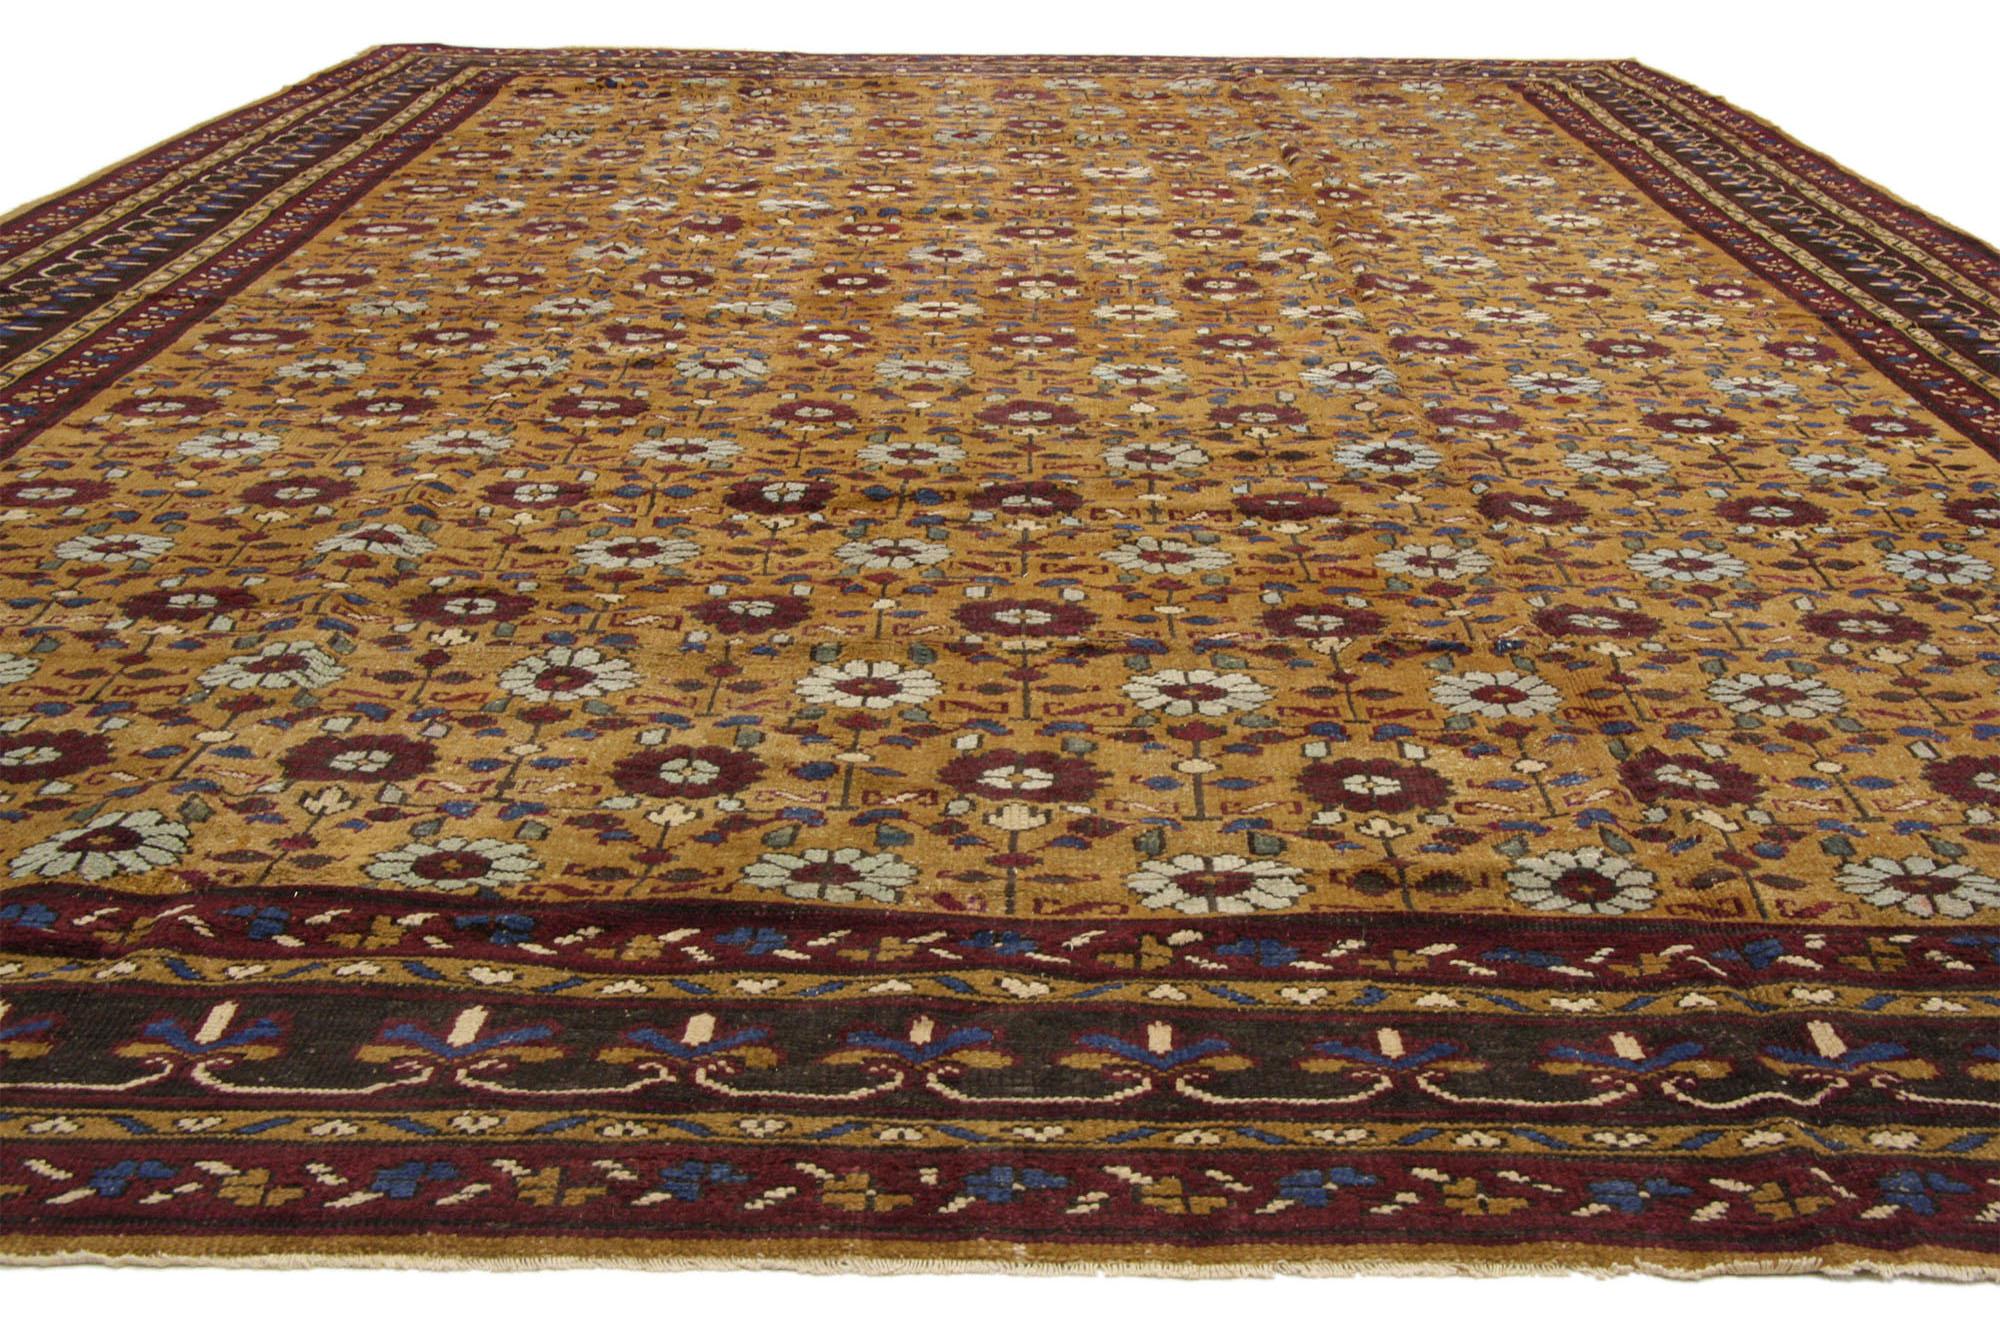 Late 19th Century Antique Indian Agra Carpet, 12'00 x 16'09 For Sale 1